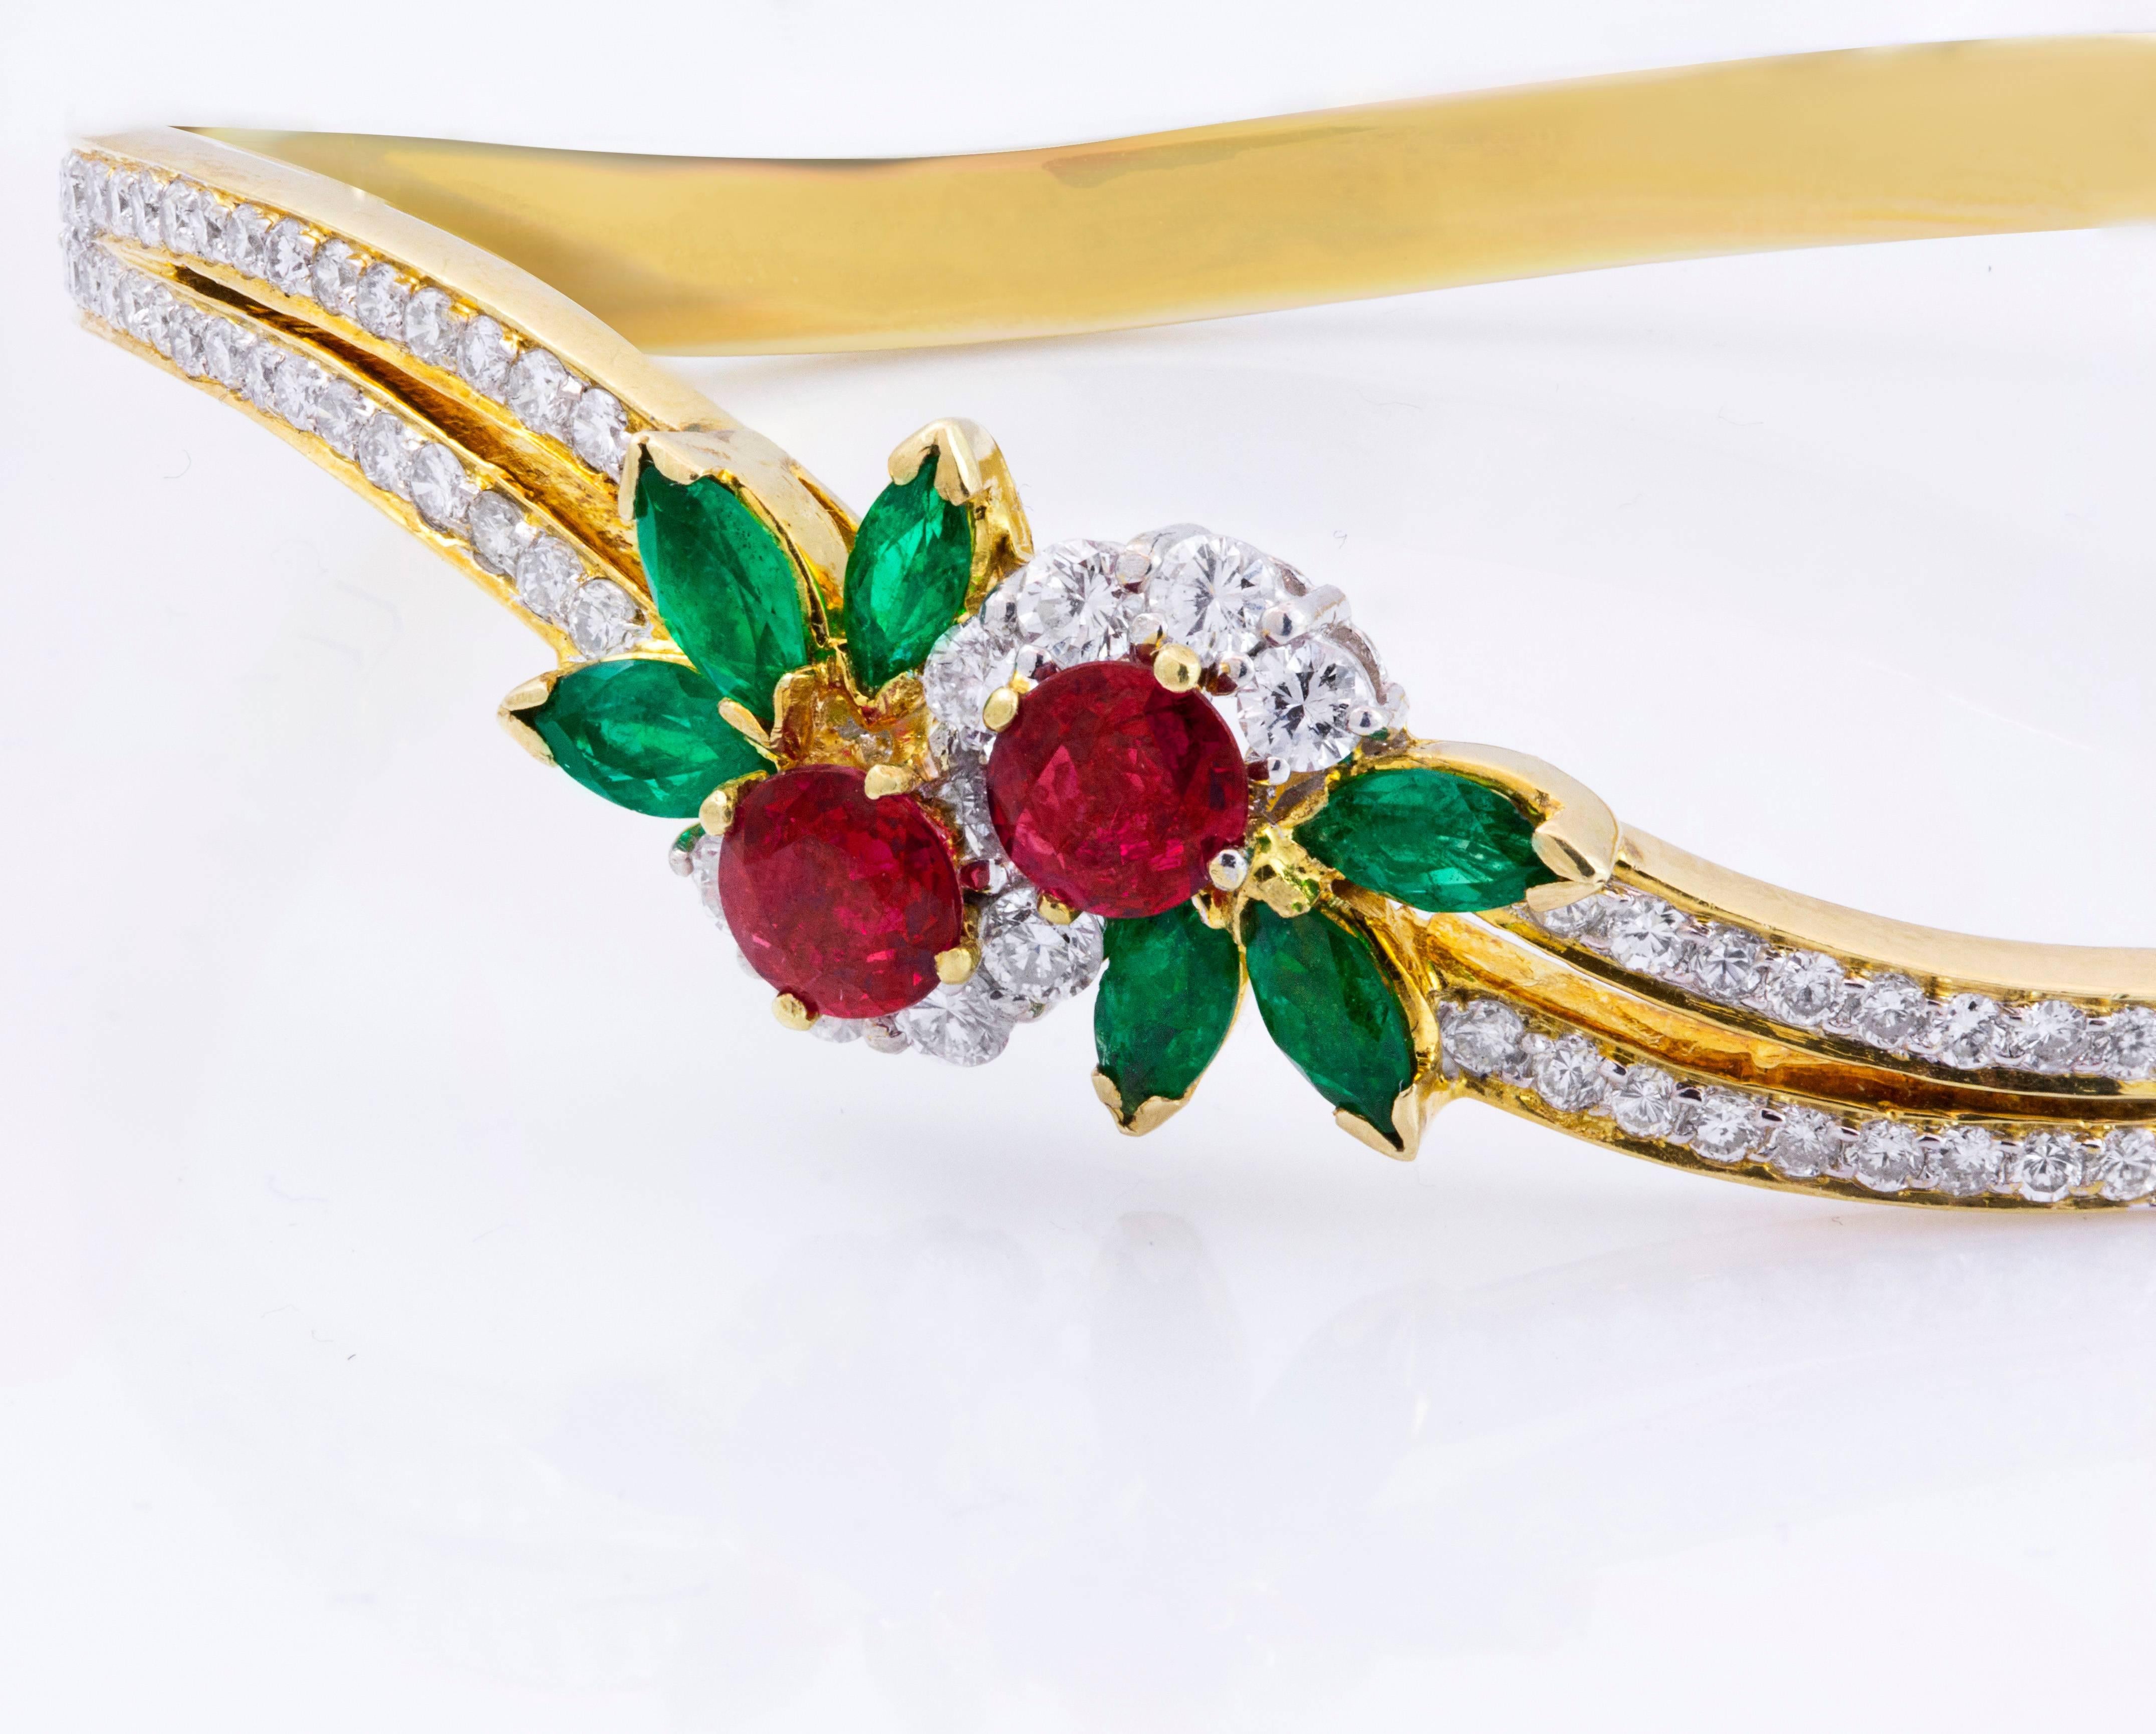 This beautiful bracelet is an estate piece that features 2 rubies weighing 1.05 carats total accented with brilliant round diamonds around. Set with marquise cut emeralds weighing 1.20 carats total on each side of the emerald. Looks like a flower